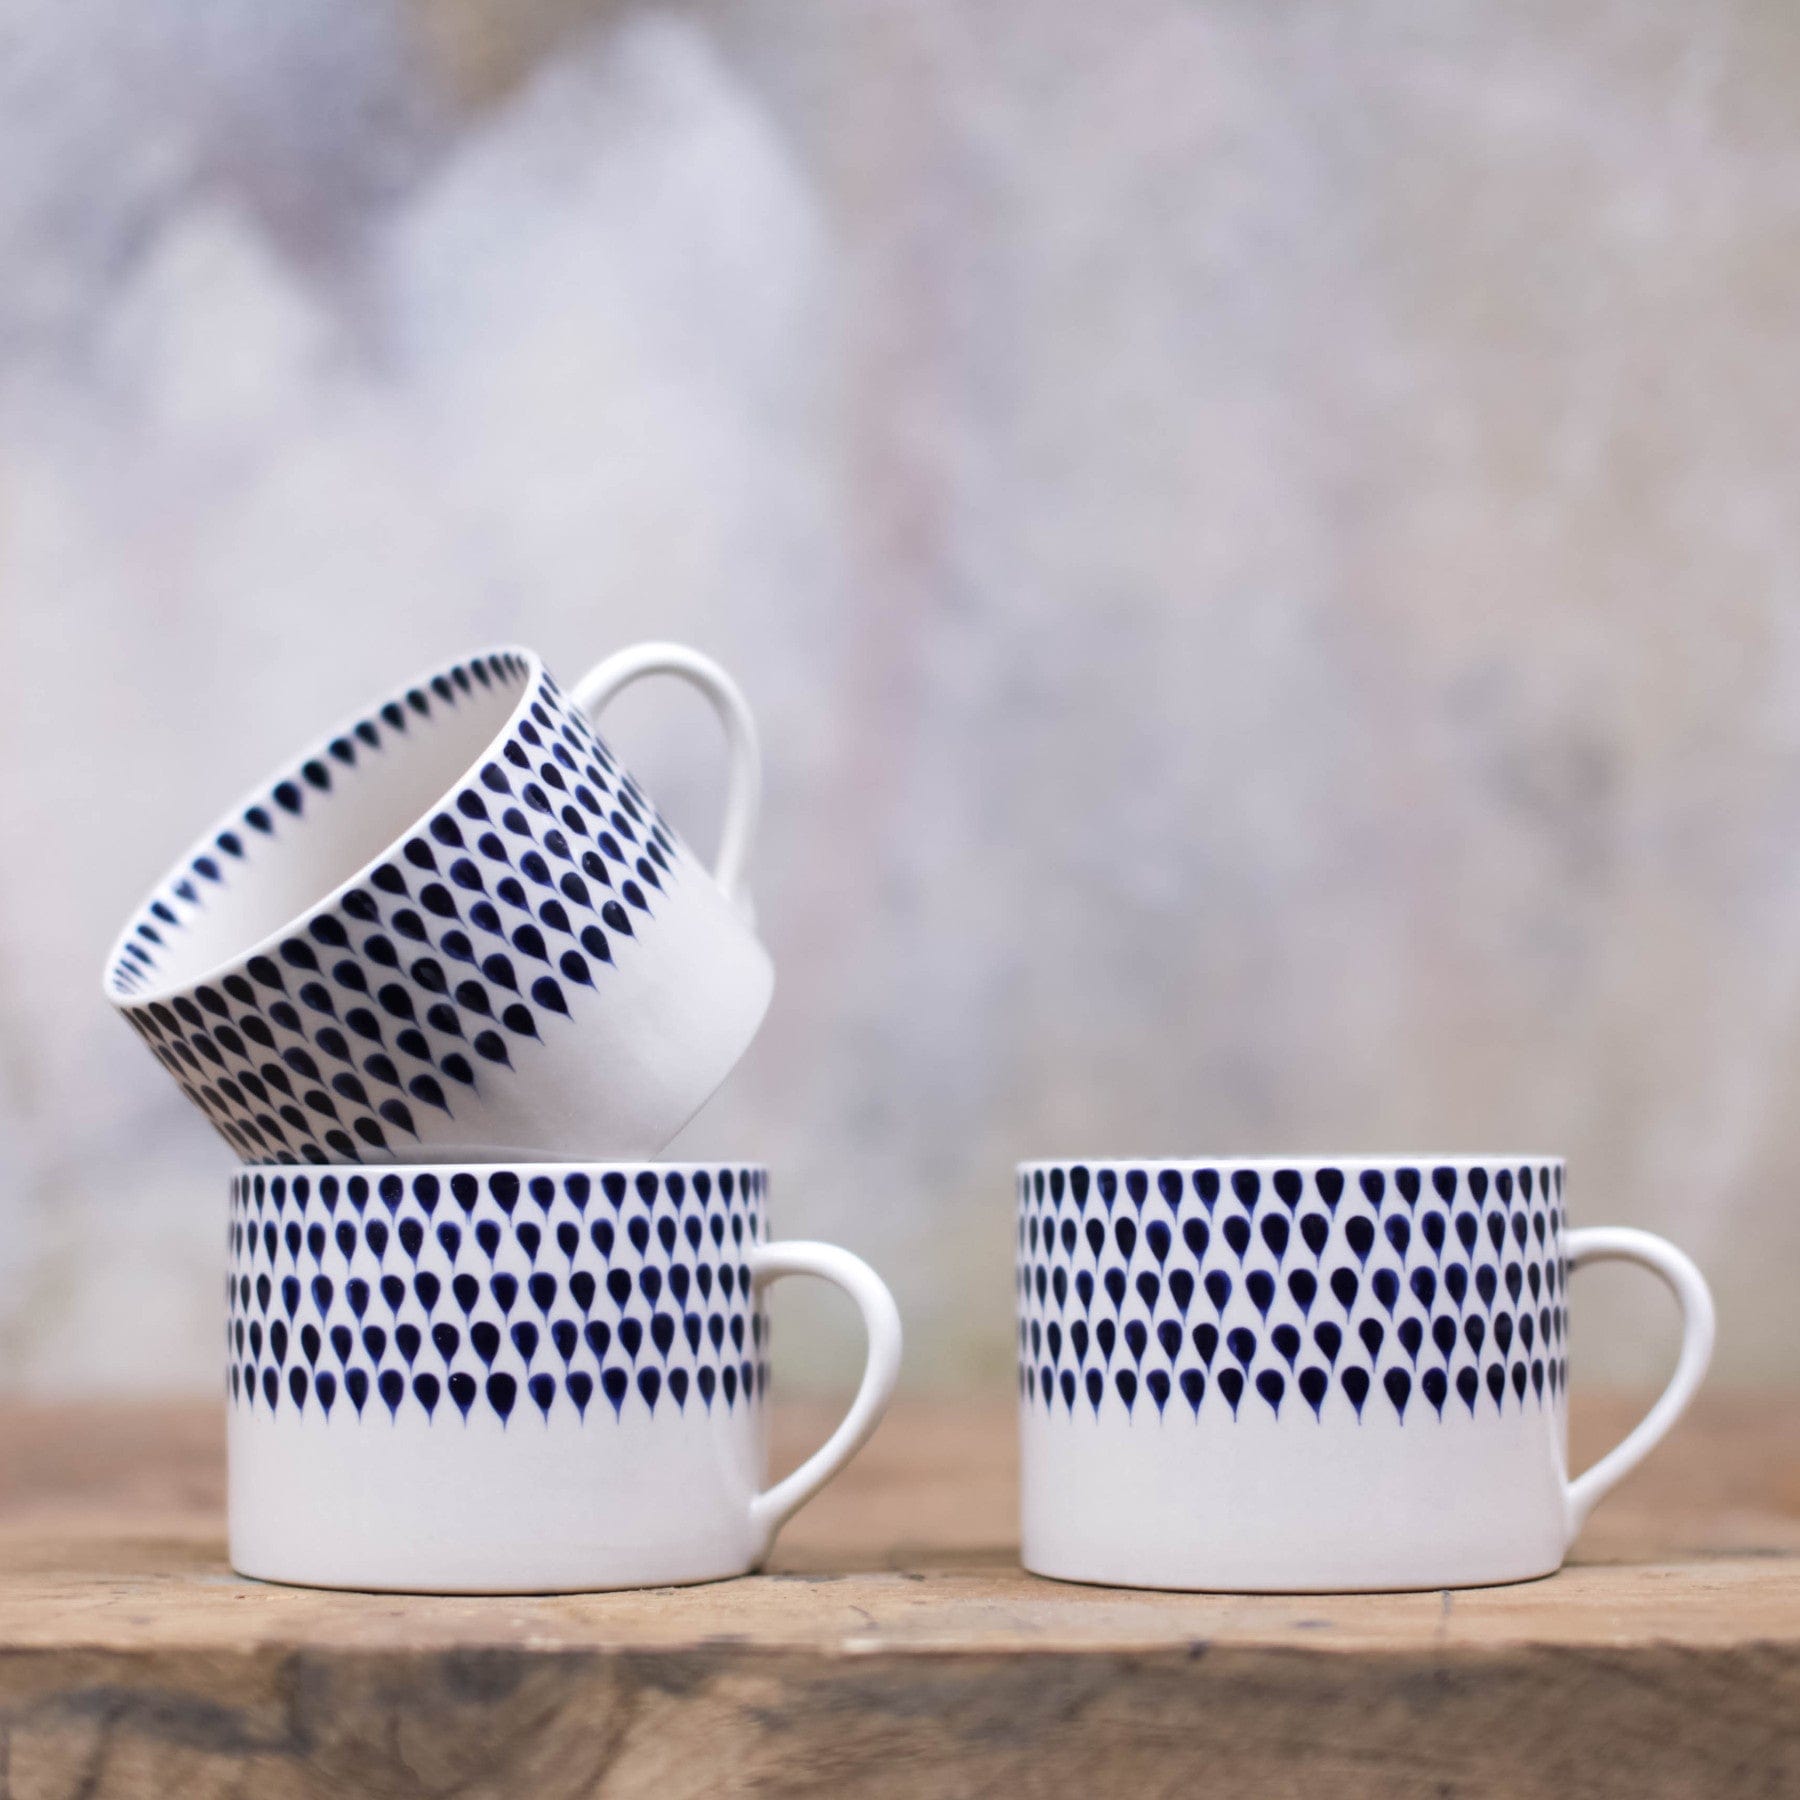 Stacked and side-by-side white ceramic cups with blue teardrop patterns on wooden surface against a textured grey background